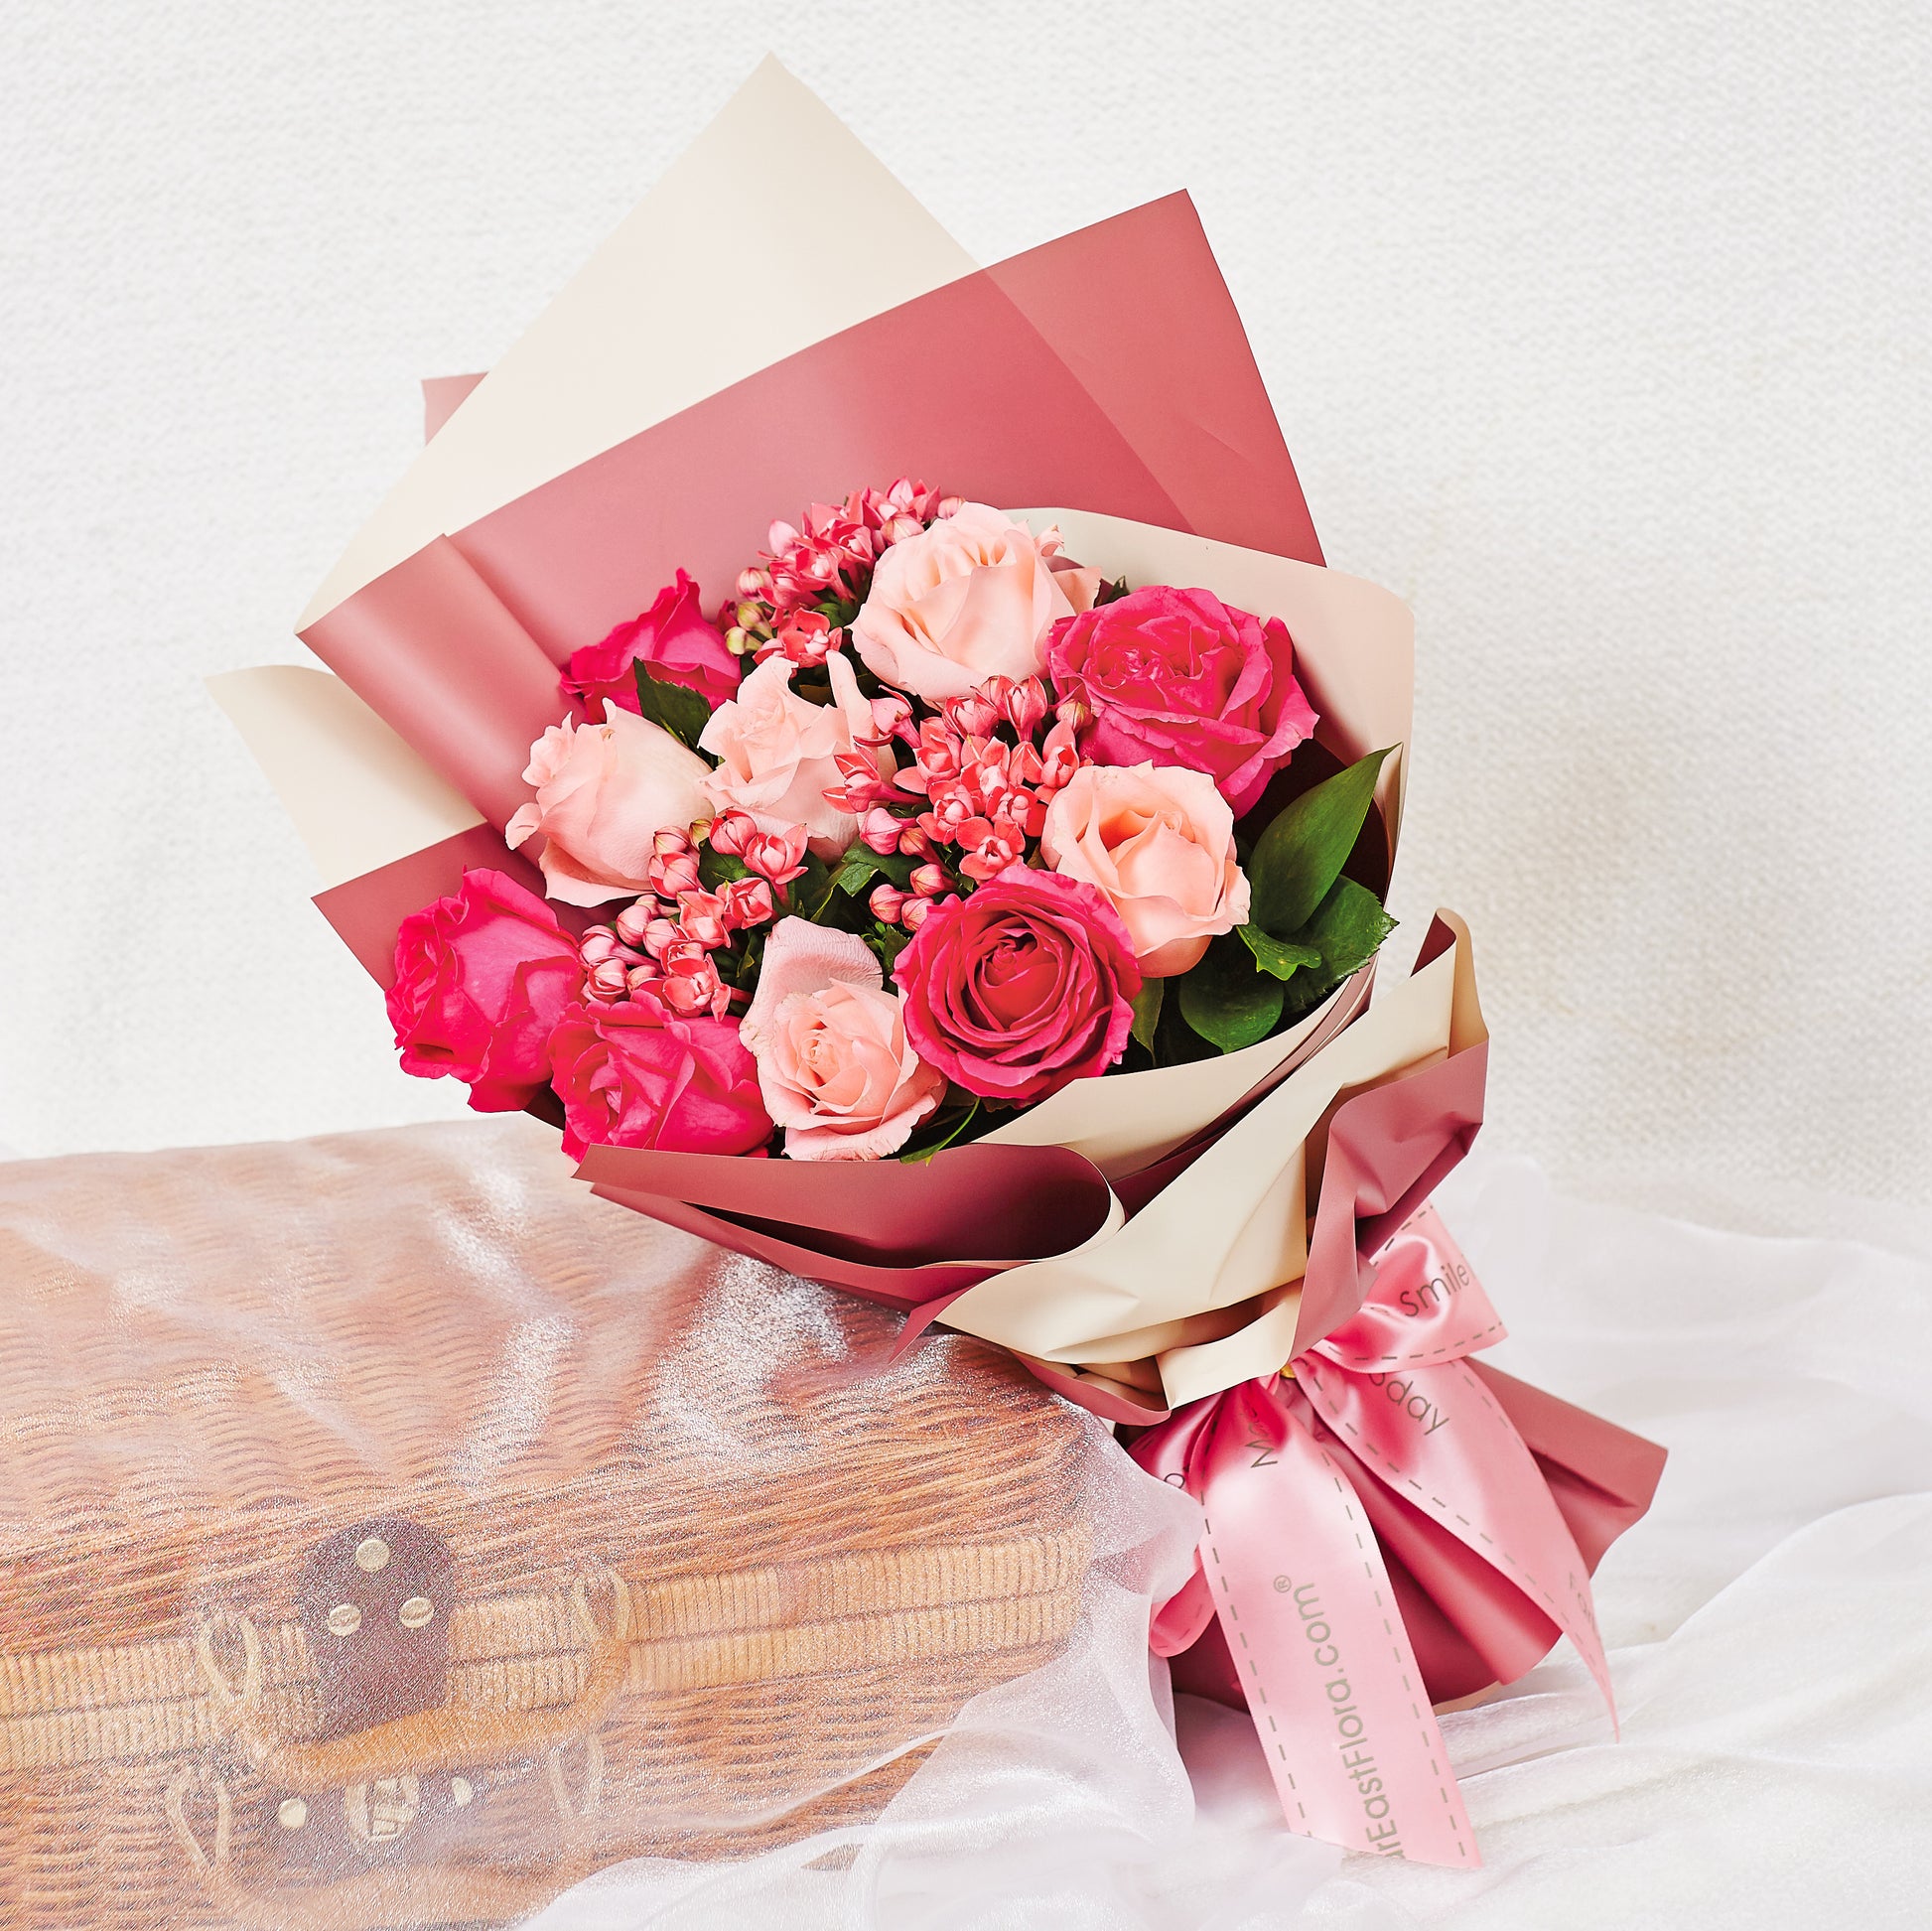 Blushing Roses - Flower Bouquet